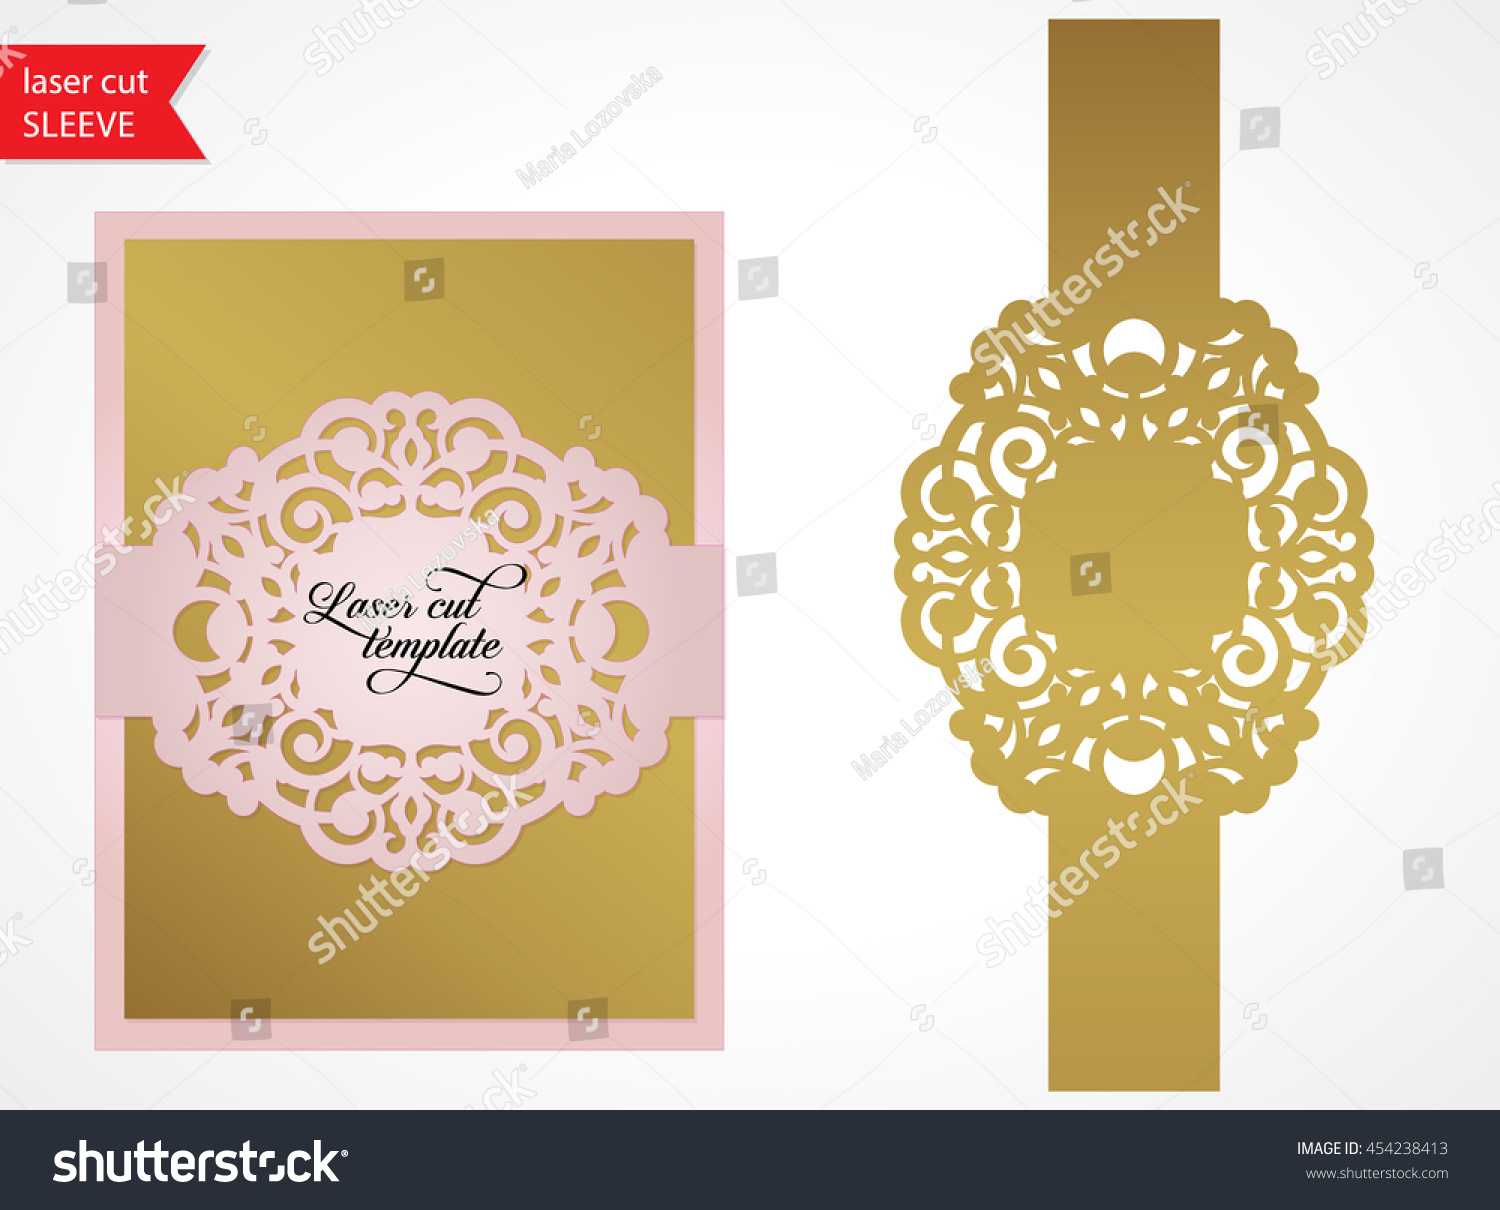 Laser Cut Wedding Invitation Template Silhouette Stock Within Silhouette Cameo Card Templates